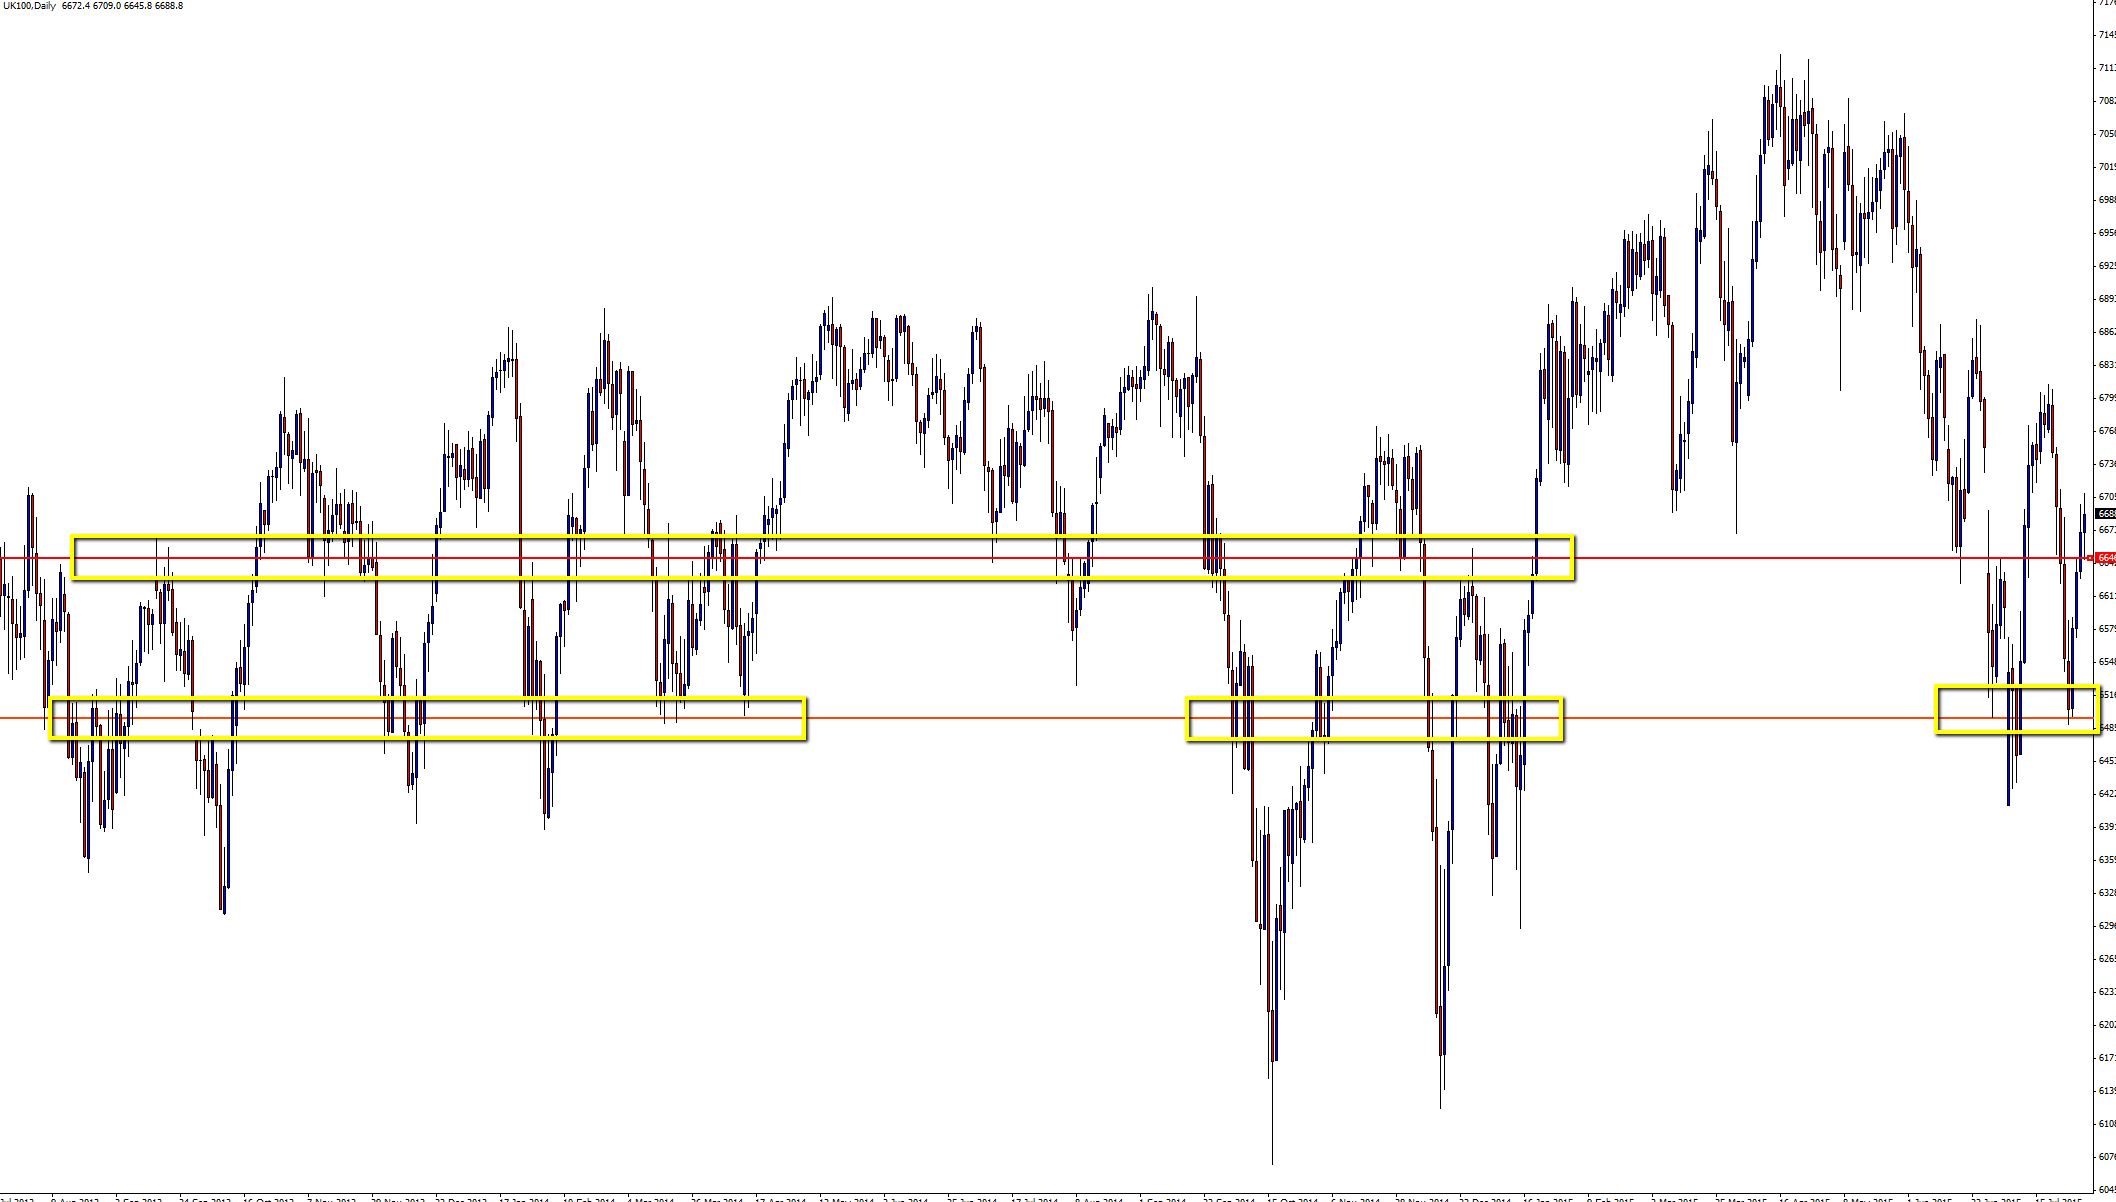 FTSE 100 Zoomed Out